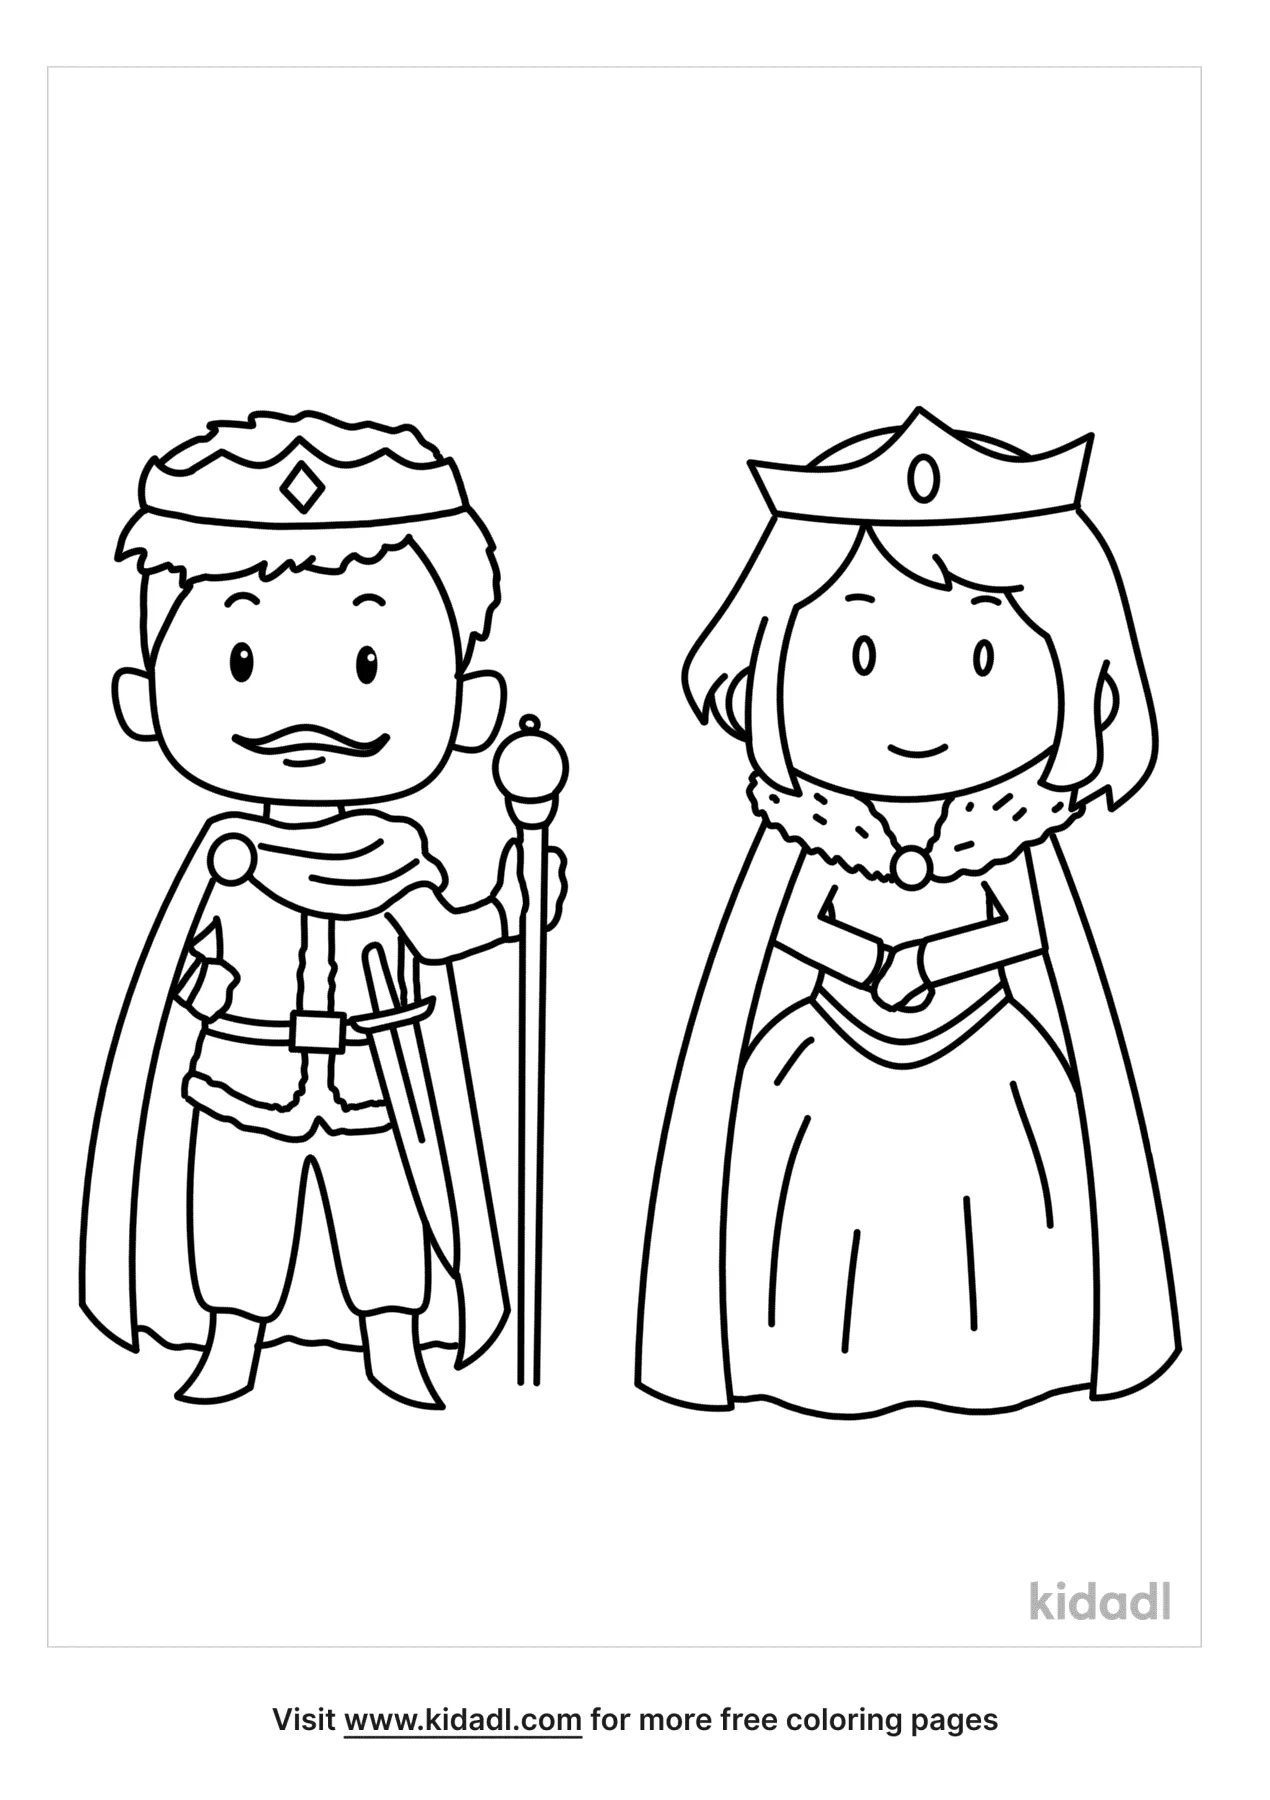 King And Queen Coloring Page   Free Fantasy and characters ...